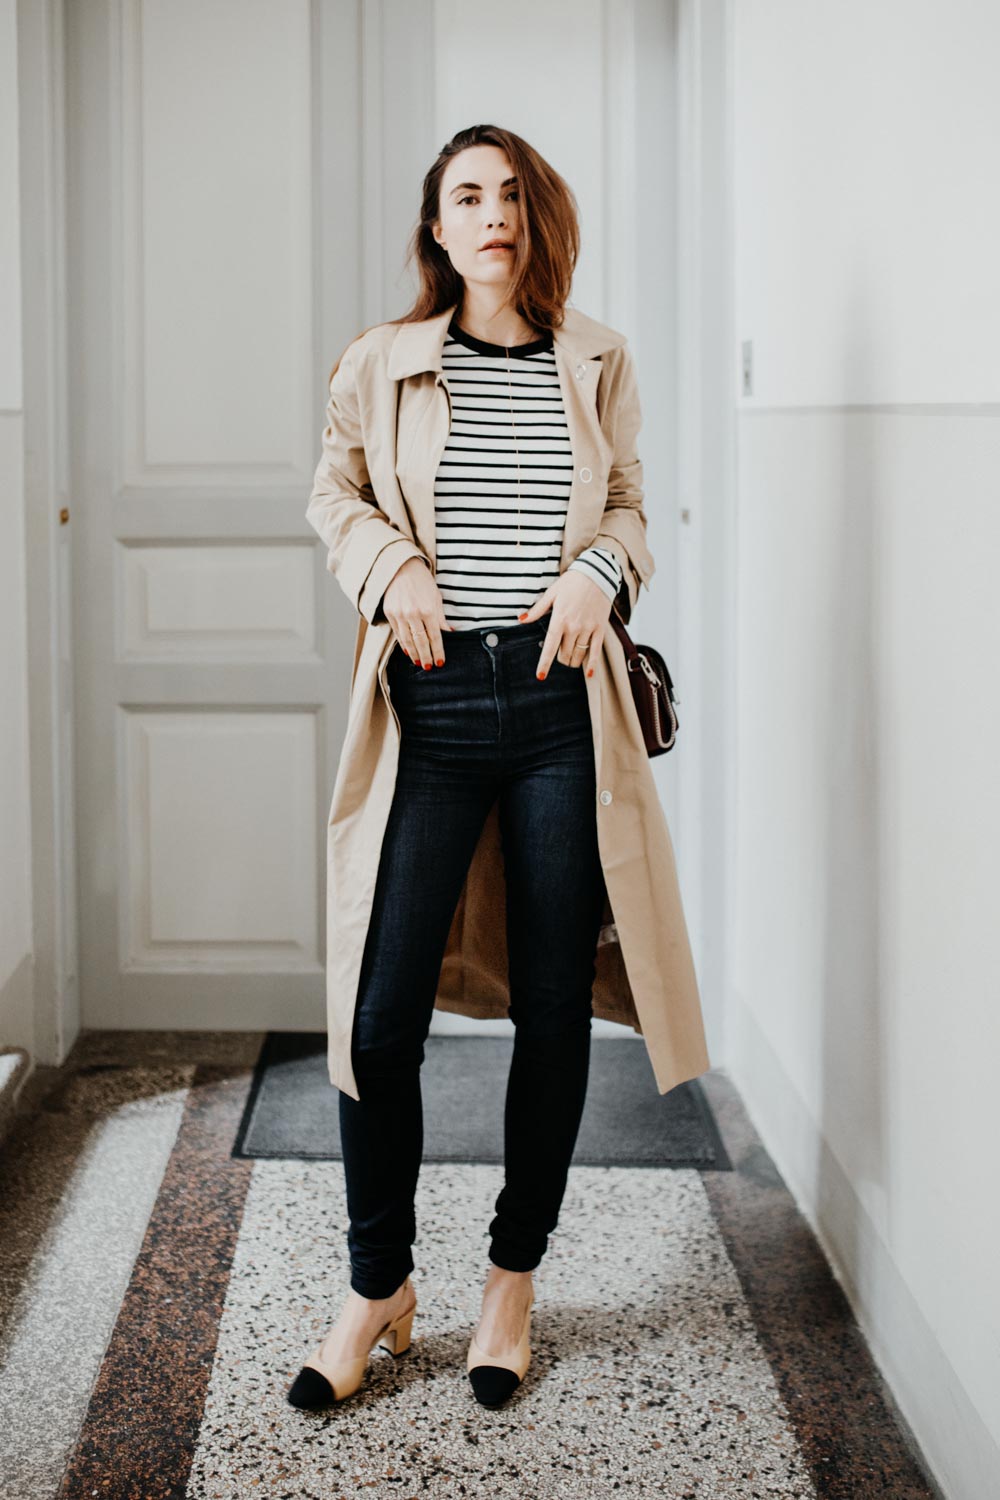 Edited Trench Coat, Edited Striped Shirt, Aigner Amber Bag, Chanel Slingbacks, Selfnation Jeans | TimelessFashion Classics - You Rock My Life